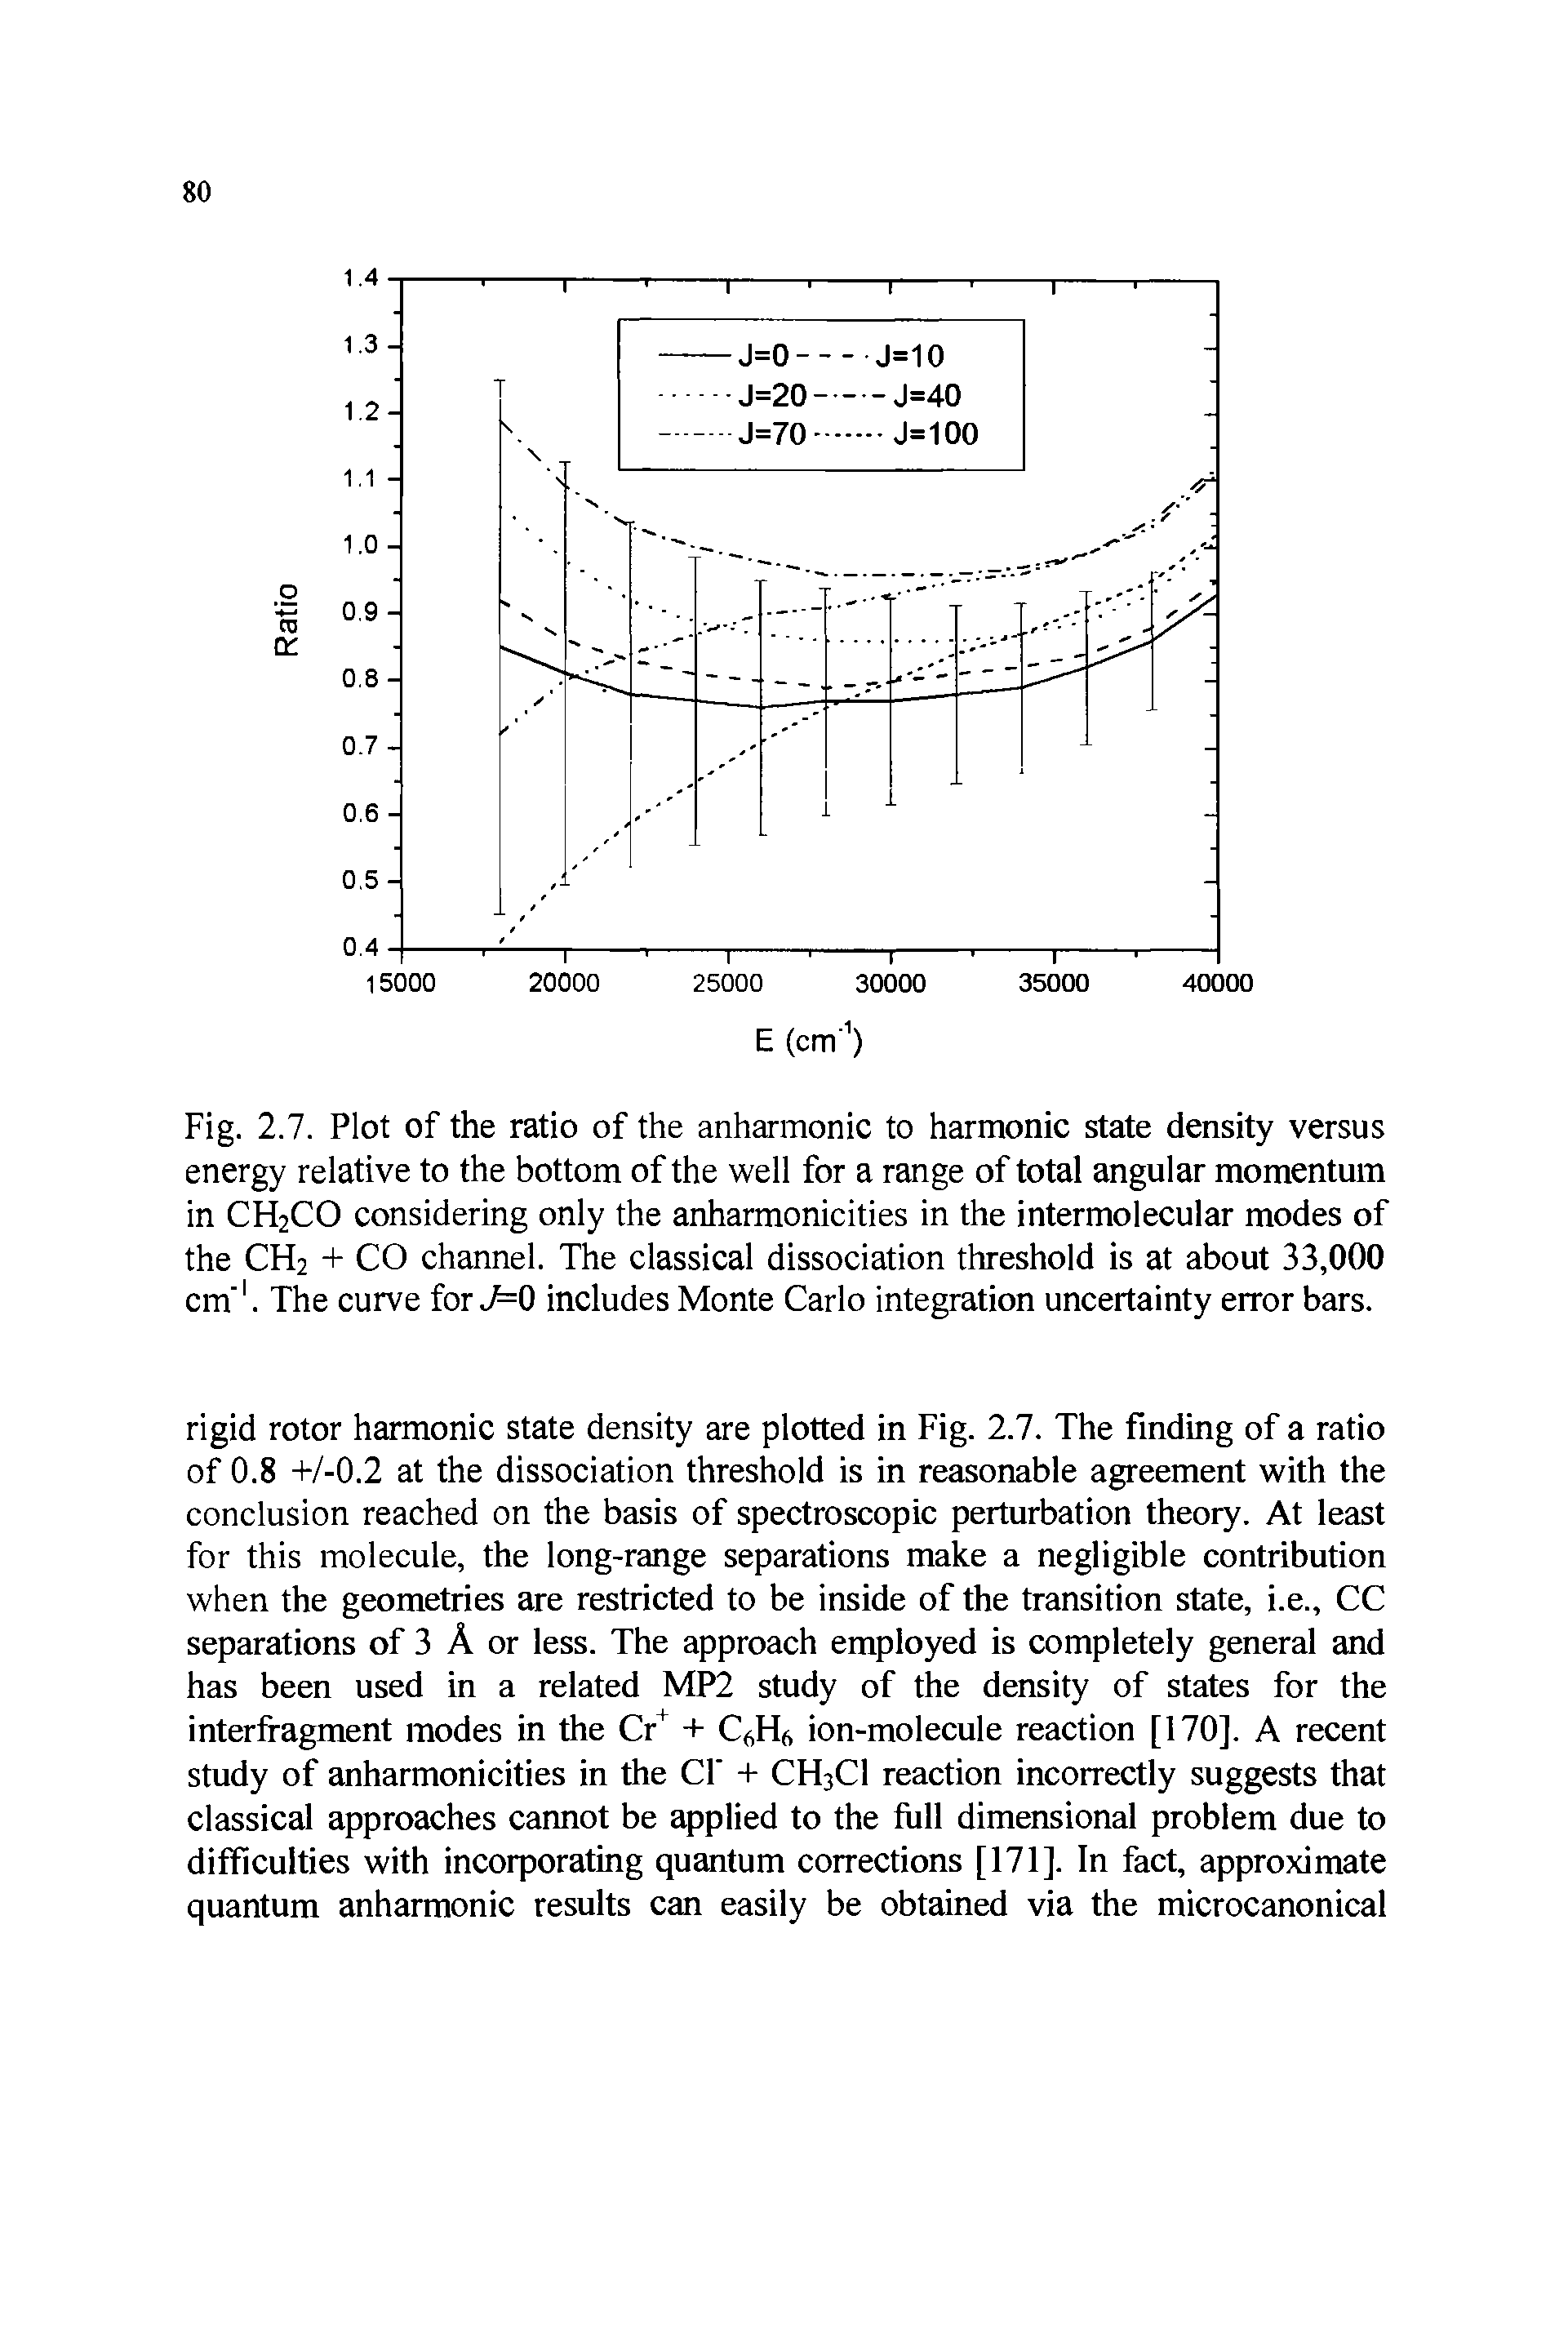 Fig. 2.7. Plot of the ratio of the anharmonic to harmonic state density versus energy relative to the bottom of the well for a range of total angular momentum in CH2CO considering only the anharmonicities in the intermolecular modes of the CH2 + CO channel. The classical dissociation threshold is at about 33,000 cm. The curve for J=Q includes Monte Carlo integration uncertainty error bars.